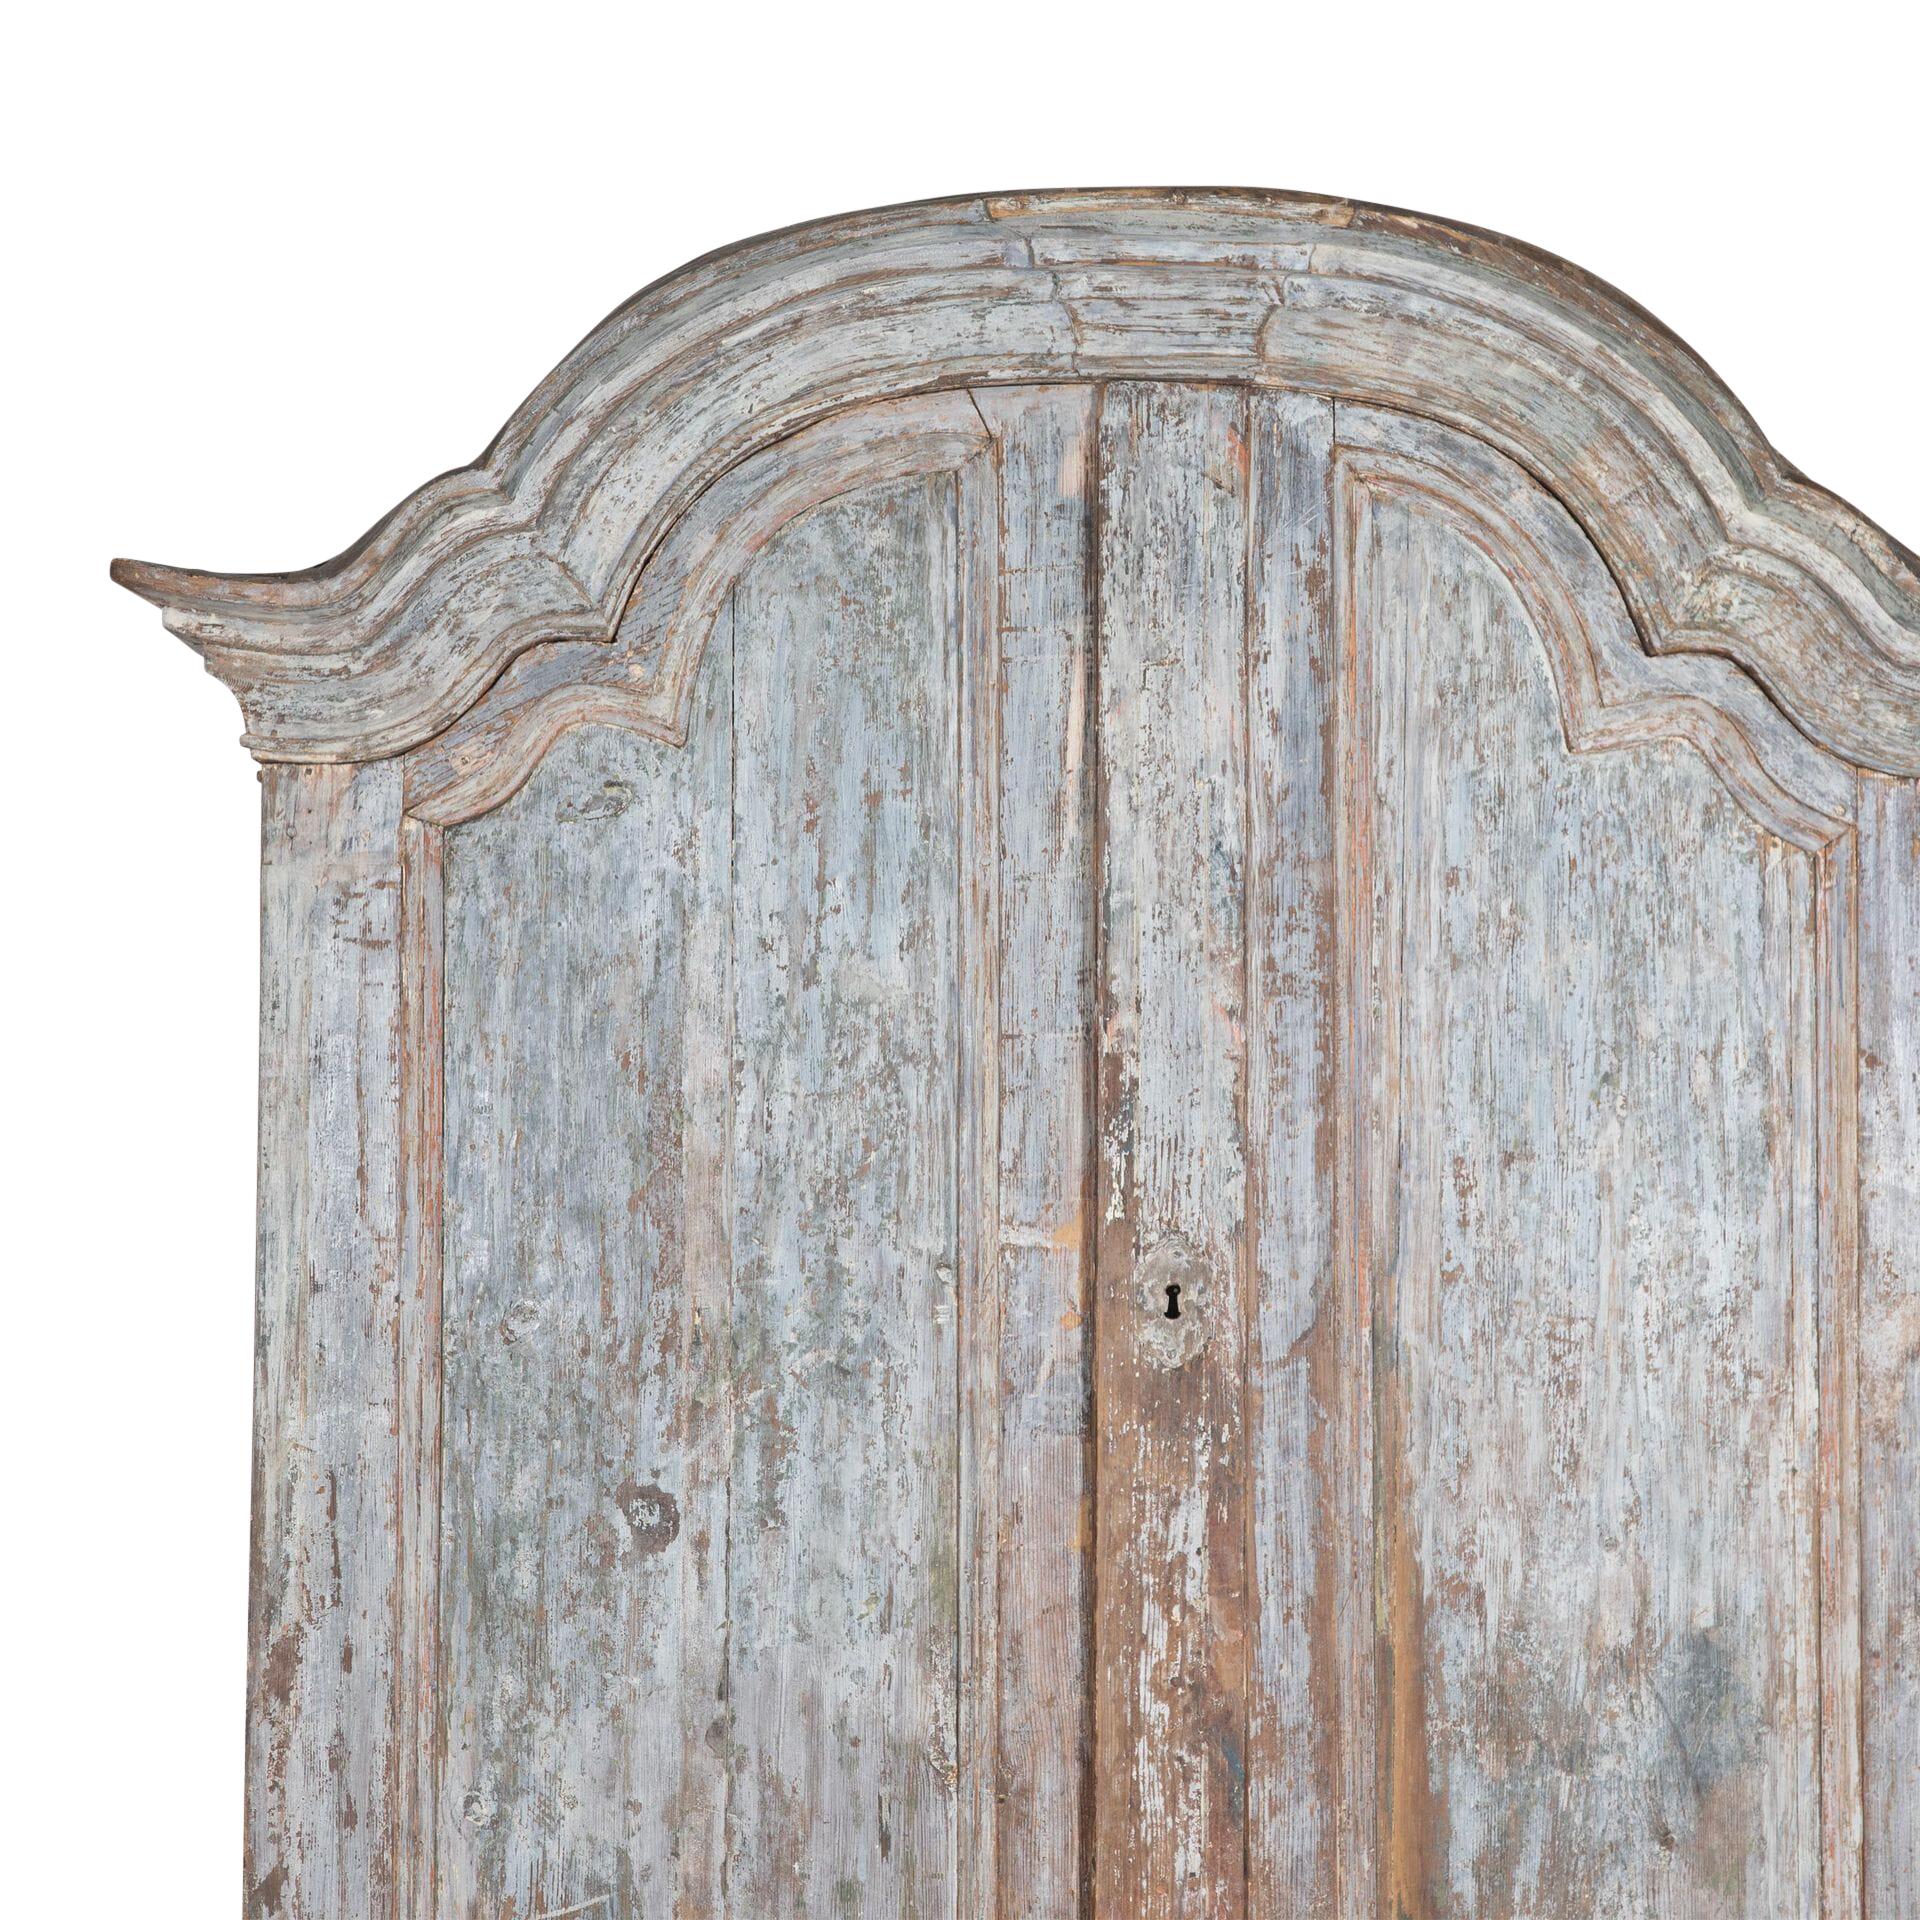 19th Century Rococo cupboard from the region of Fryksdalen Sweden.
Below the decorative carved pediment are two large doors opening to useful storage and then further below are two doors with carving opening to further storage.
Scraped to wonderful